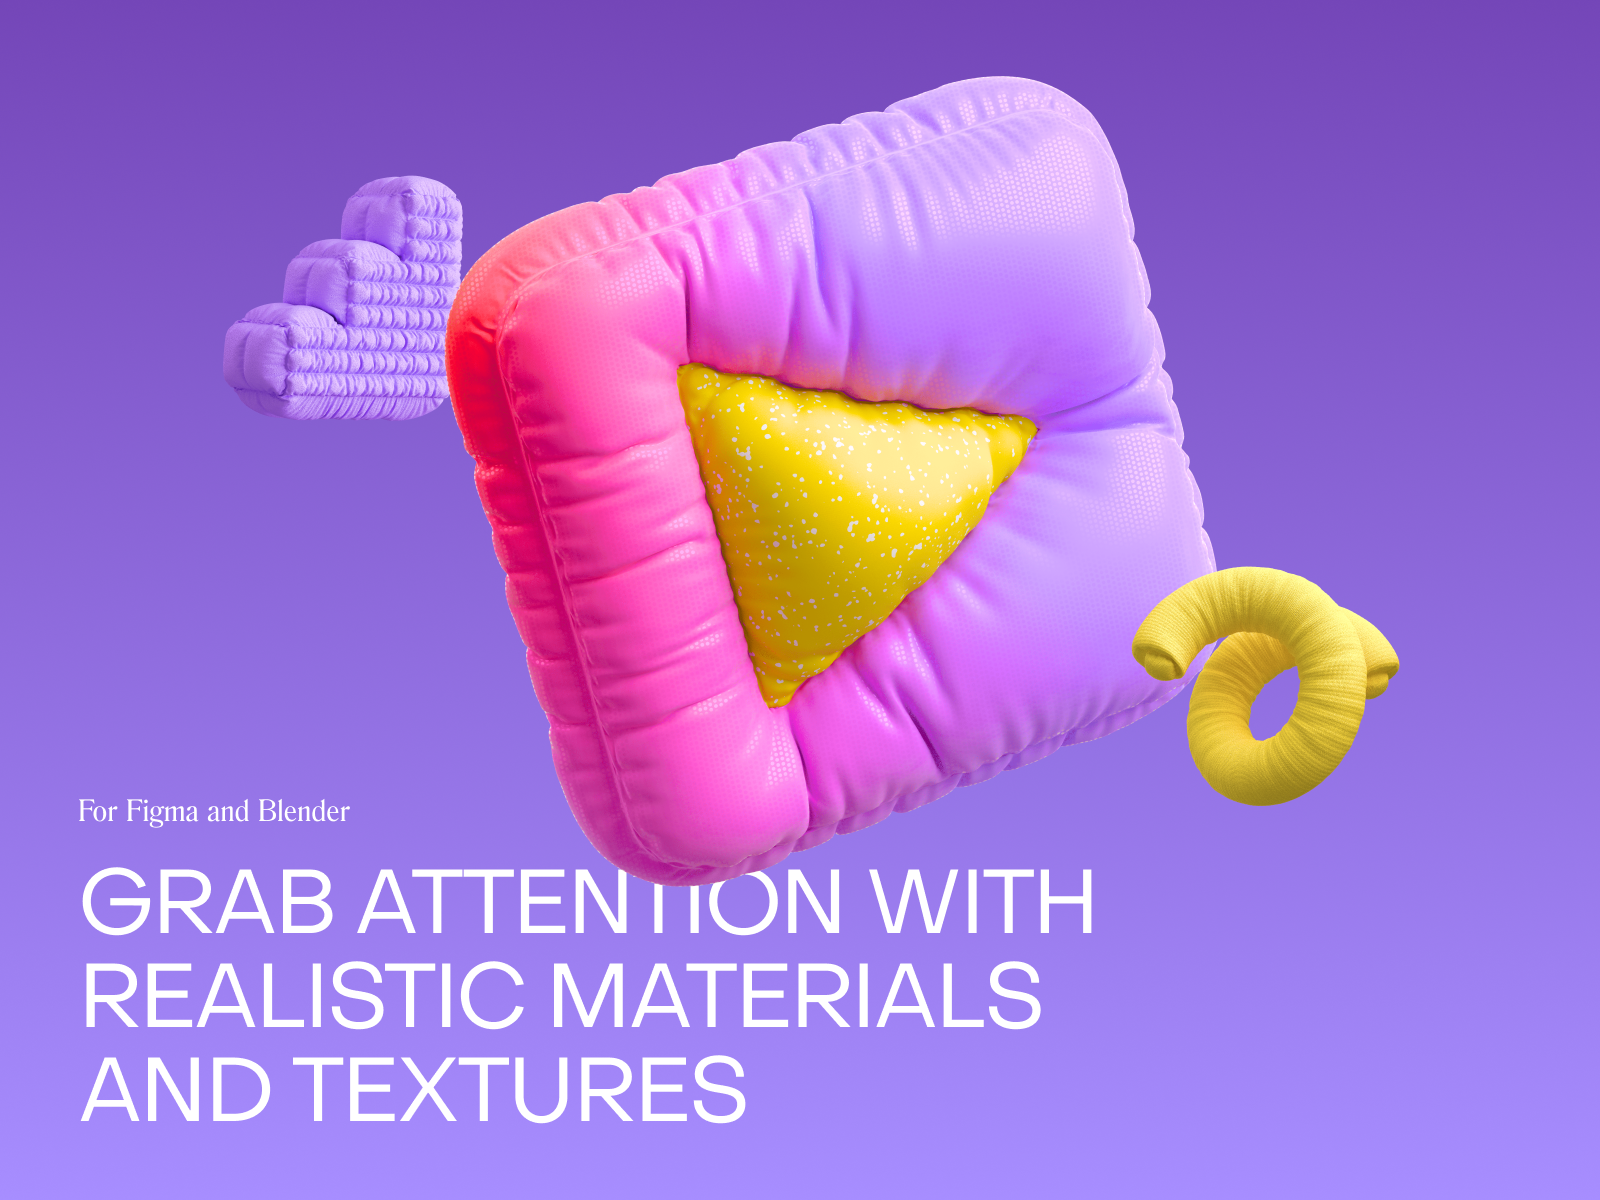 Inflatable abstract 3d illustrations